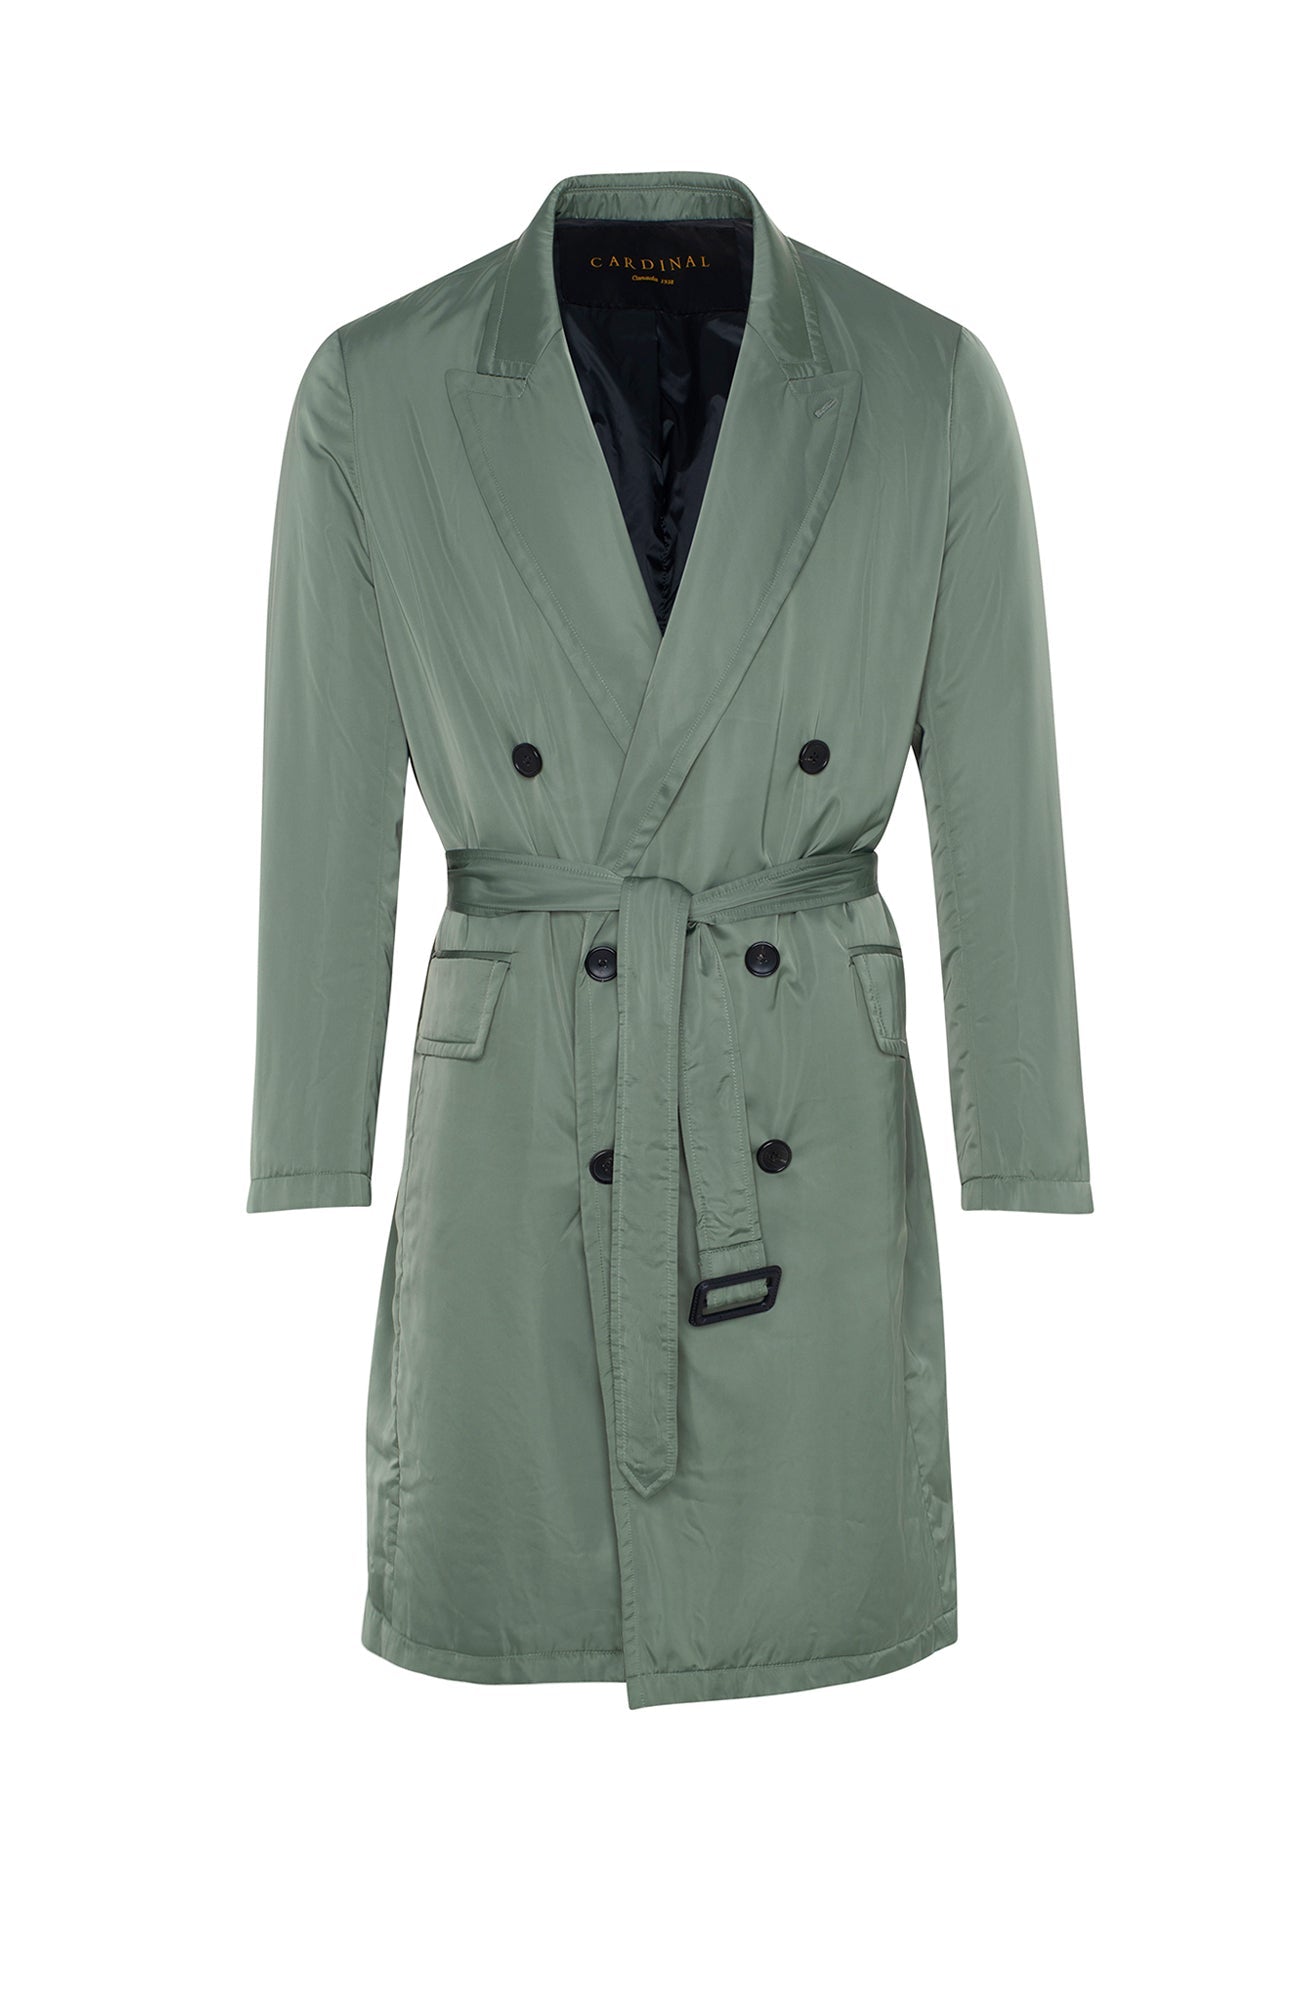 LIMITED EDITION: HUGH DOUBLE BREAST SAGE TOPCOAT - MENS - Cardinal of Canada-CA - HUGH DOUBLE BREAST TOPCOAT 41.5 INCH LENGTH